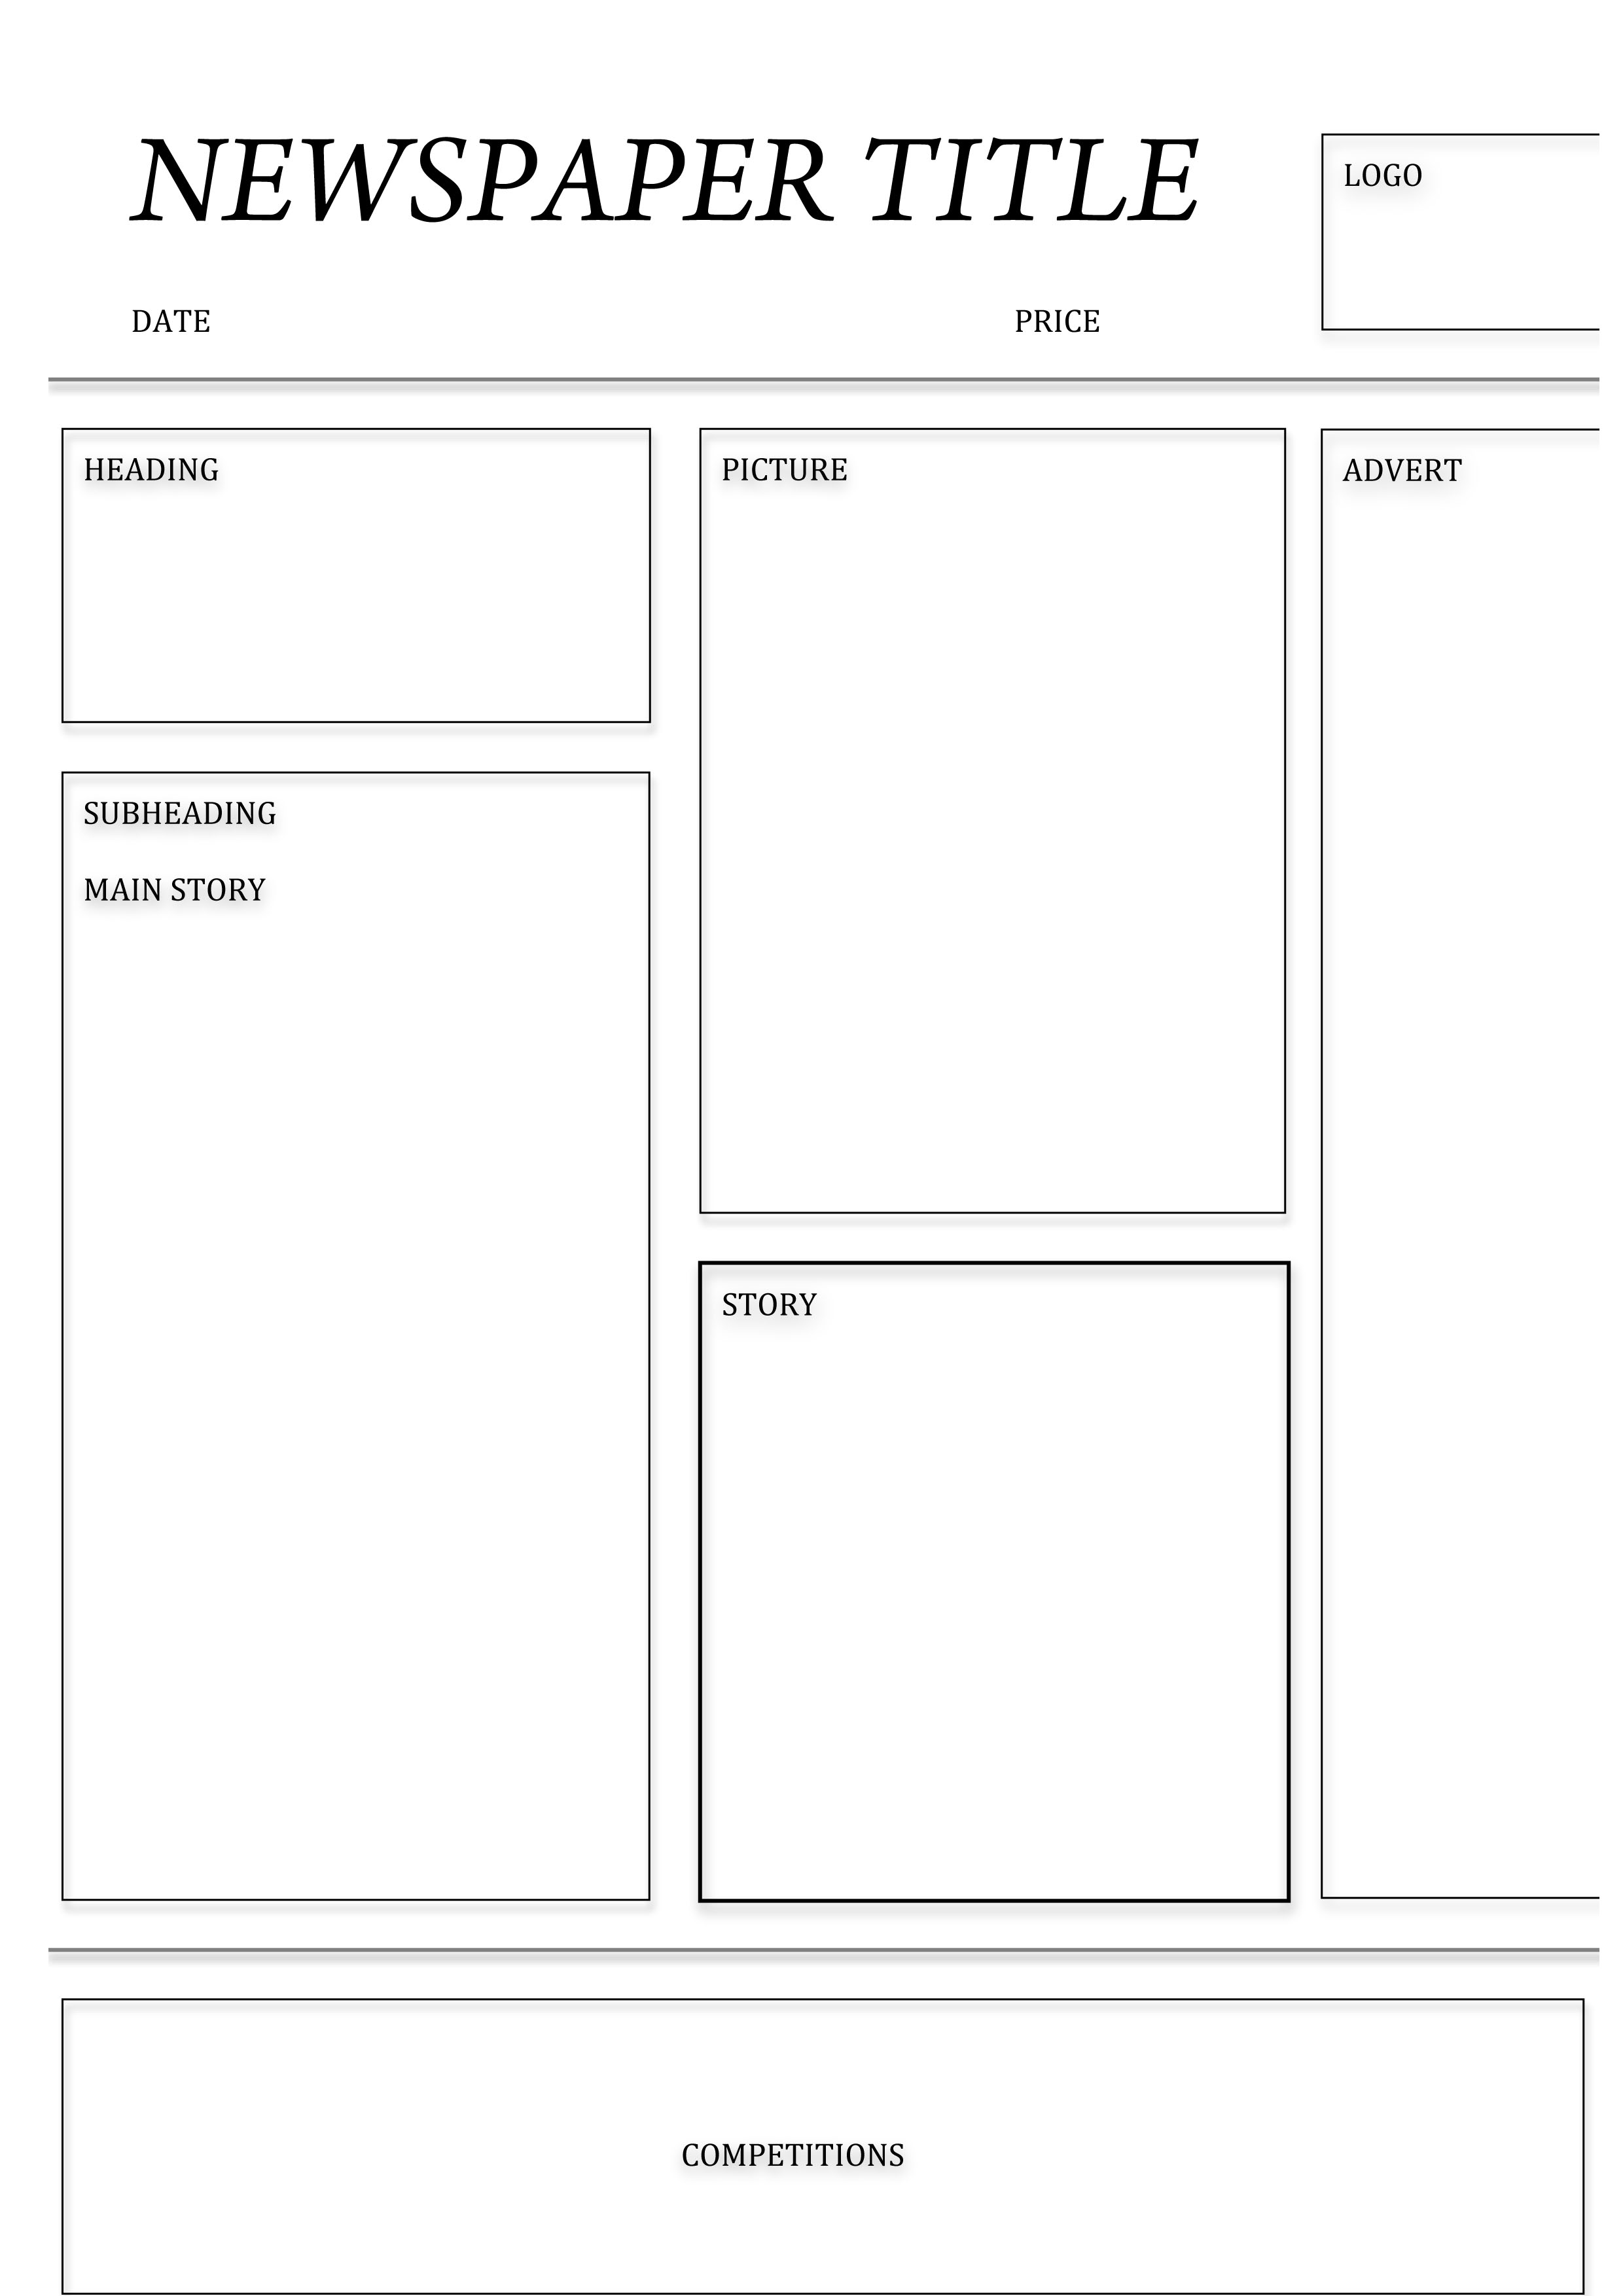 Free Newspaper Templates For Word - FREE PRINTABLE TEMPLATES